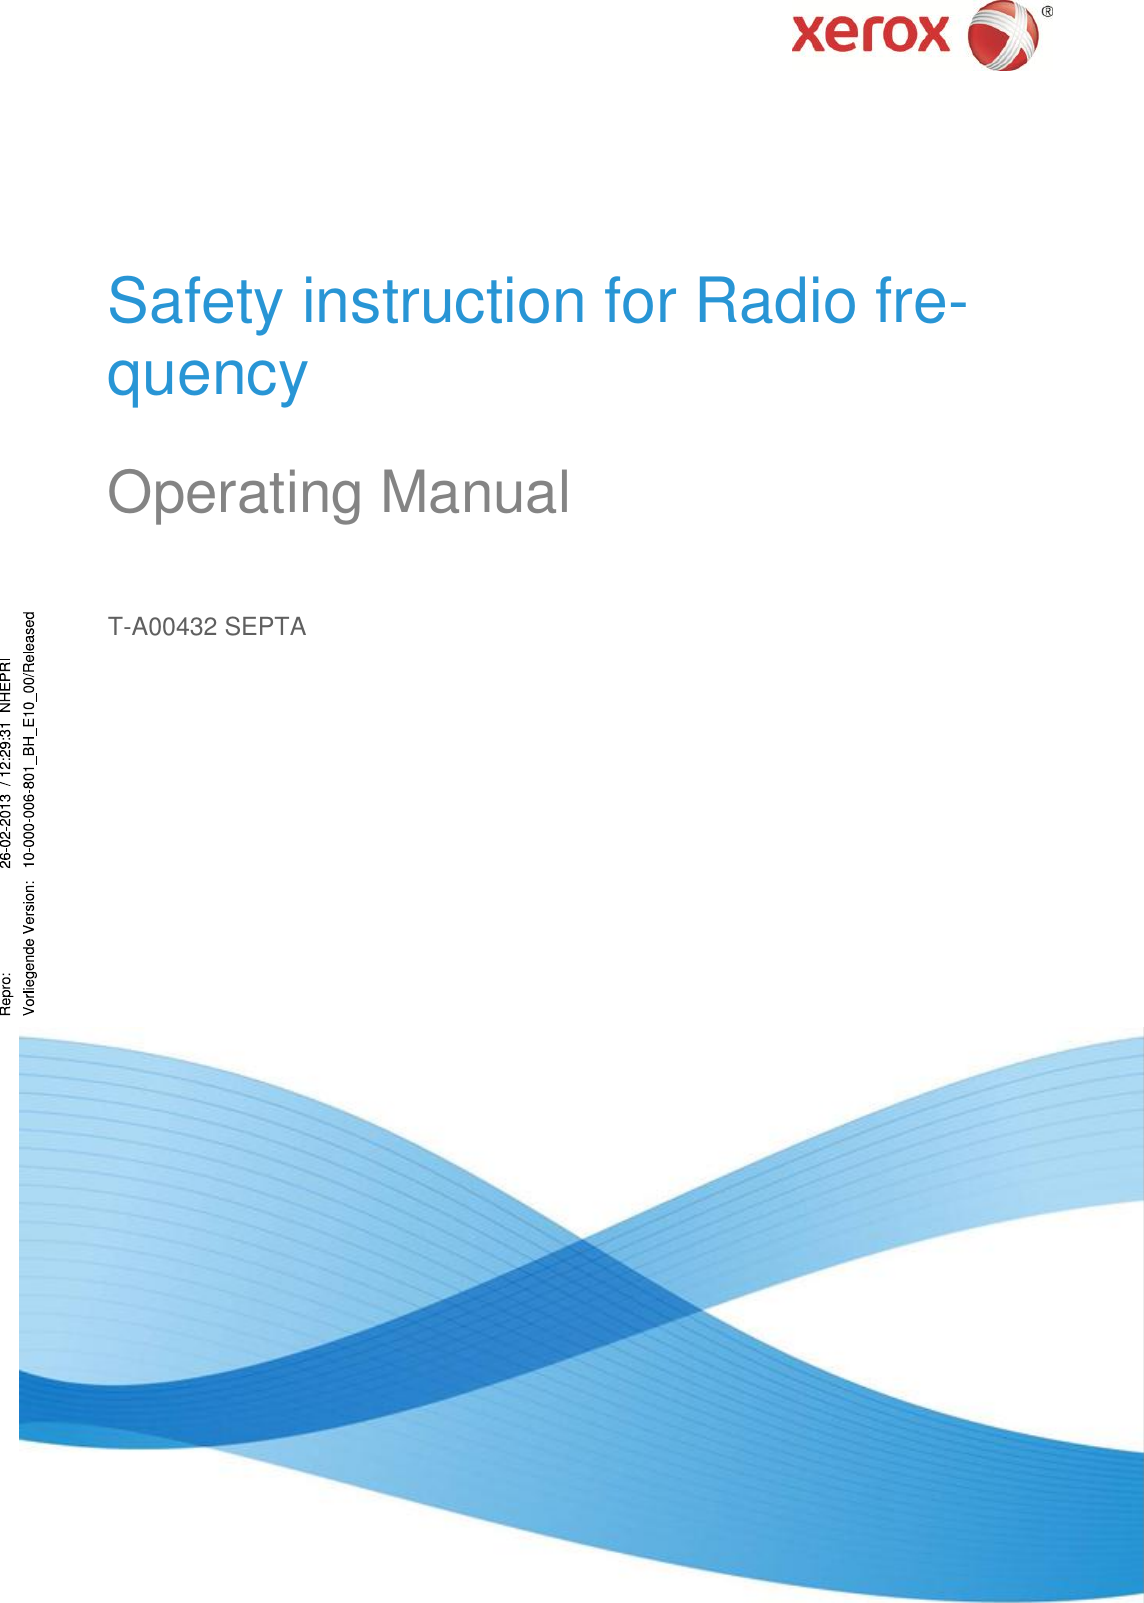     Safety instruction for Radio fre-quency Operating Manual T-A00432 SEPTA    